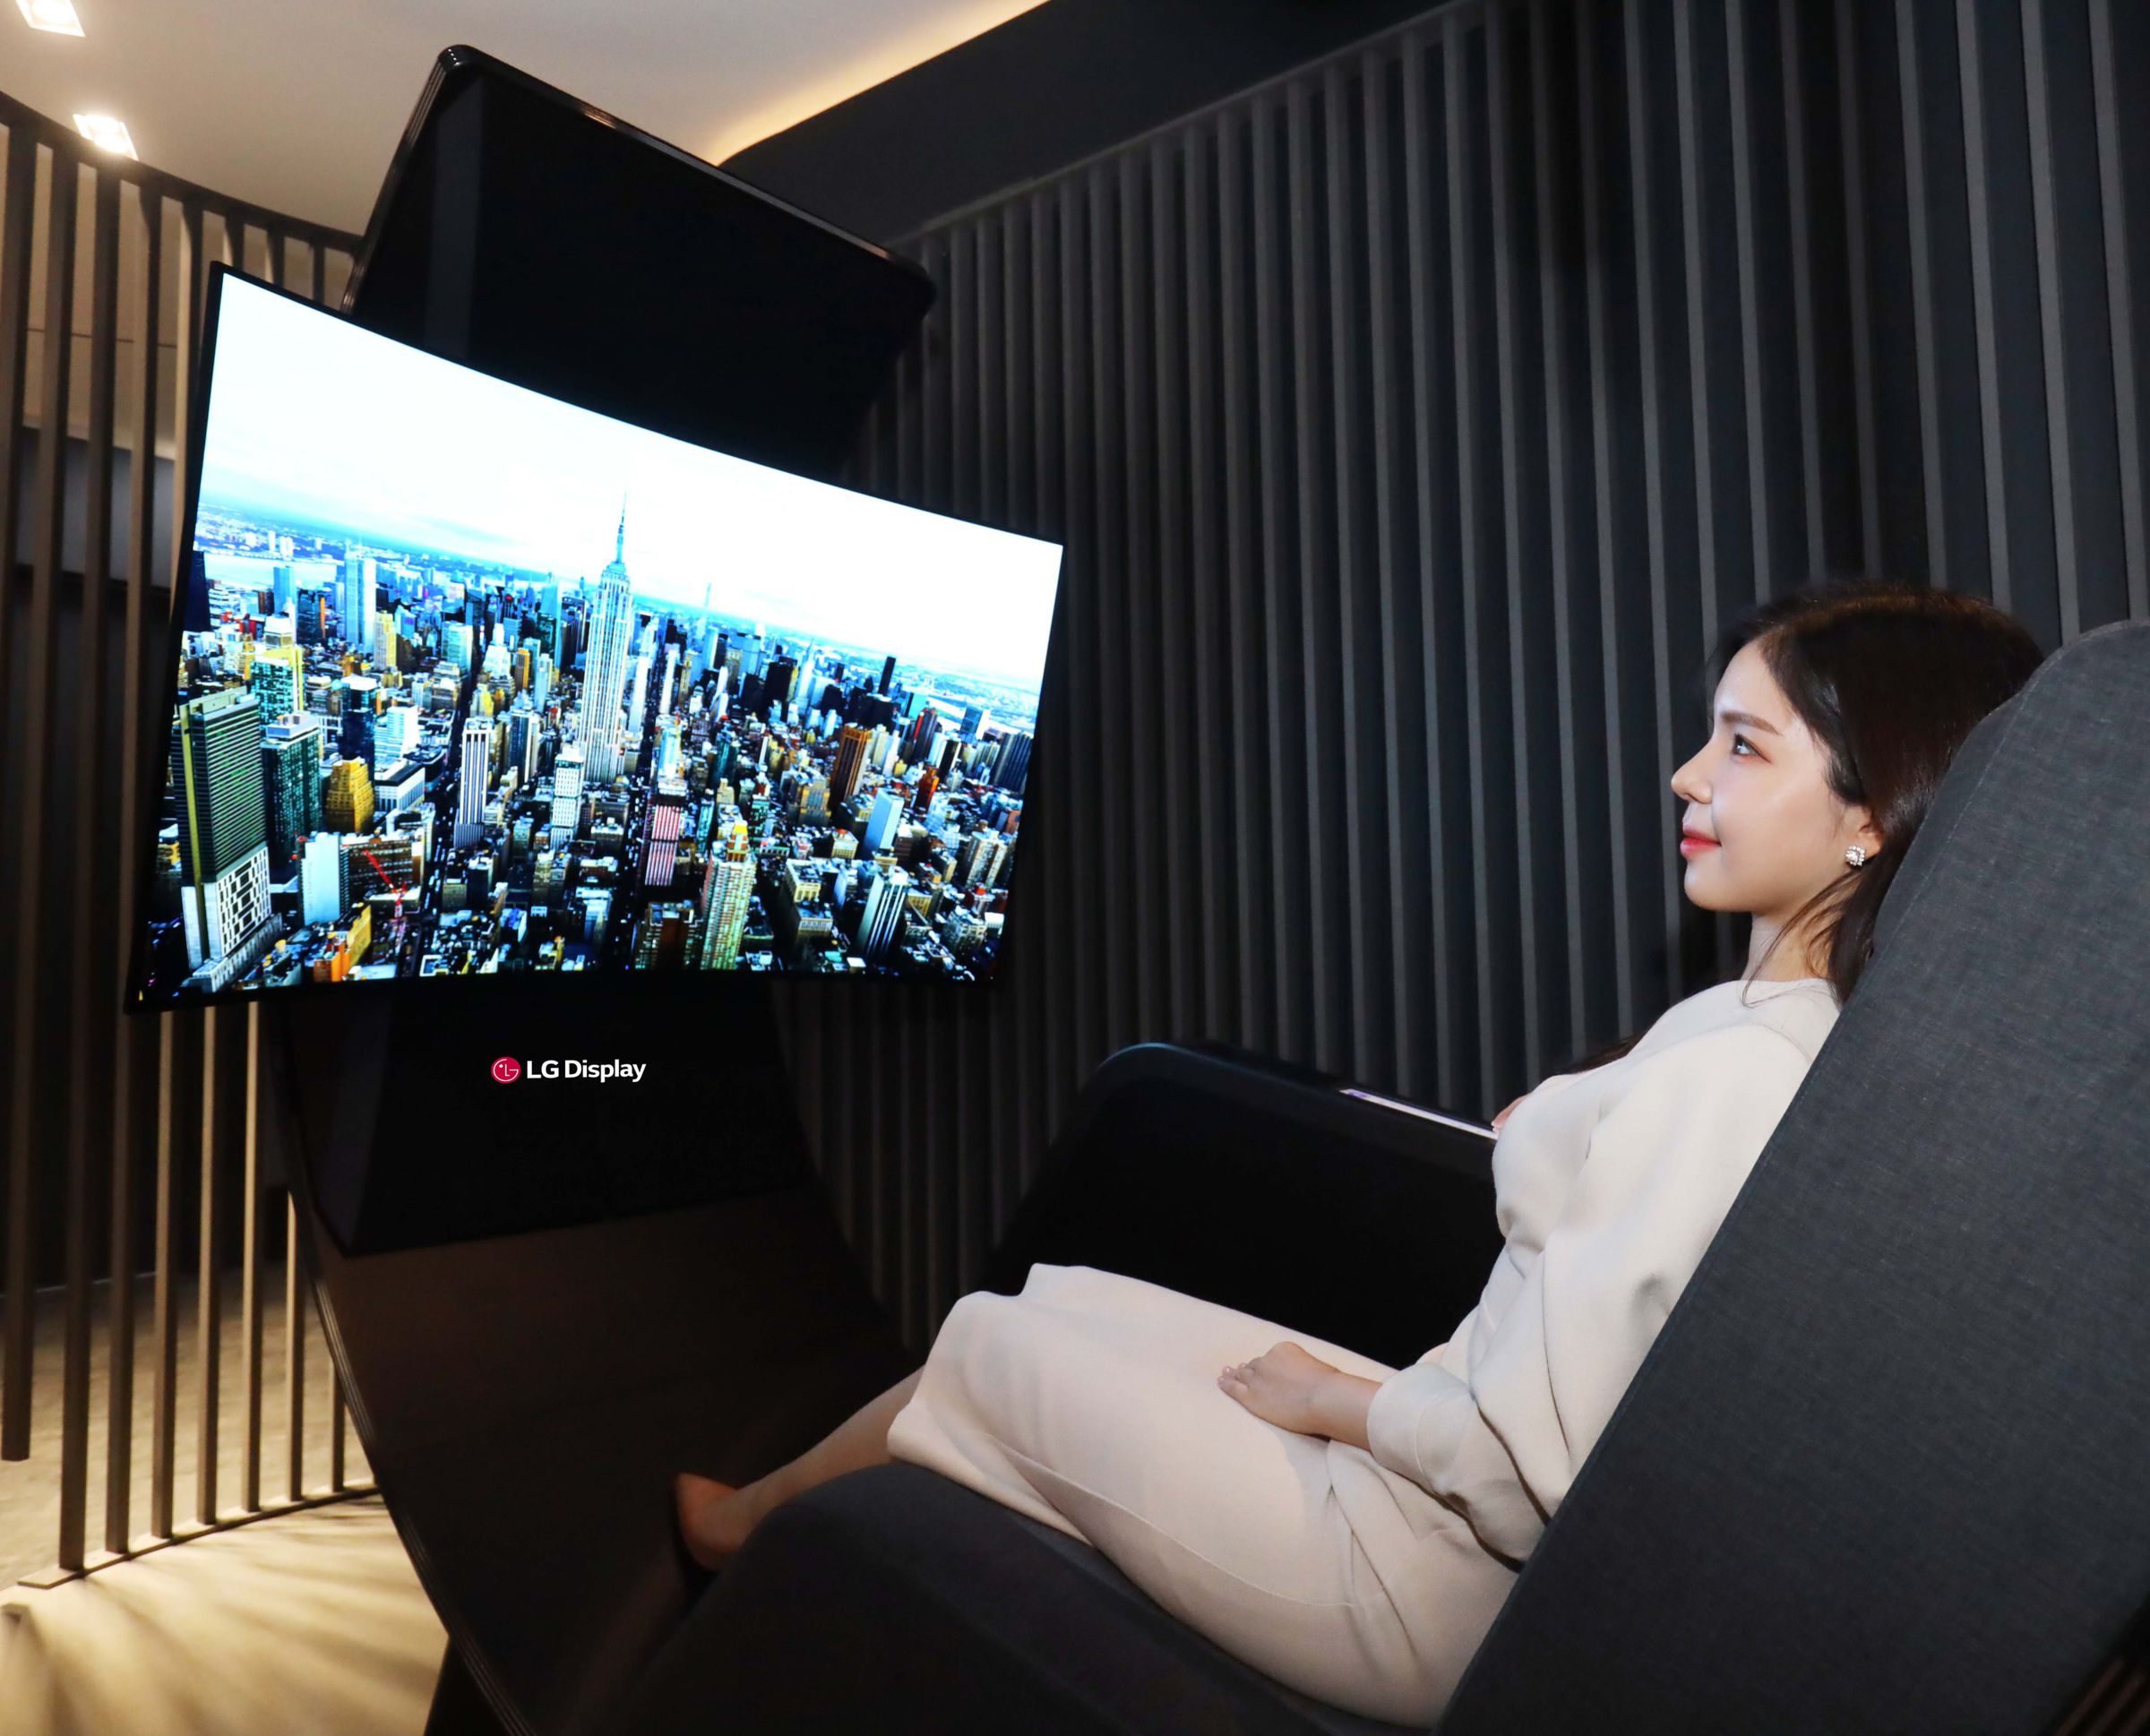 LG Display’s Media Chair concept.